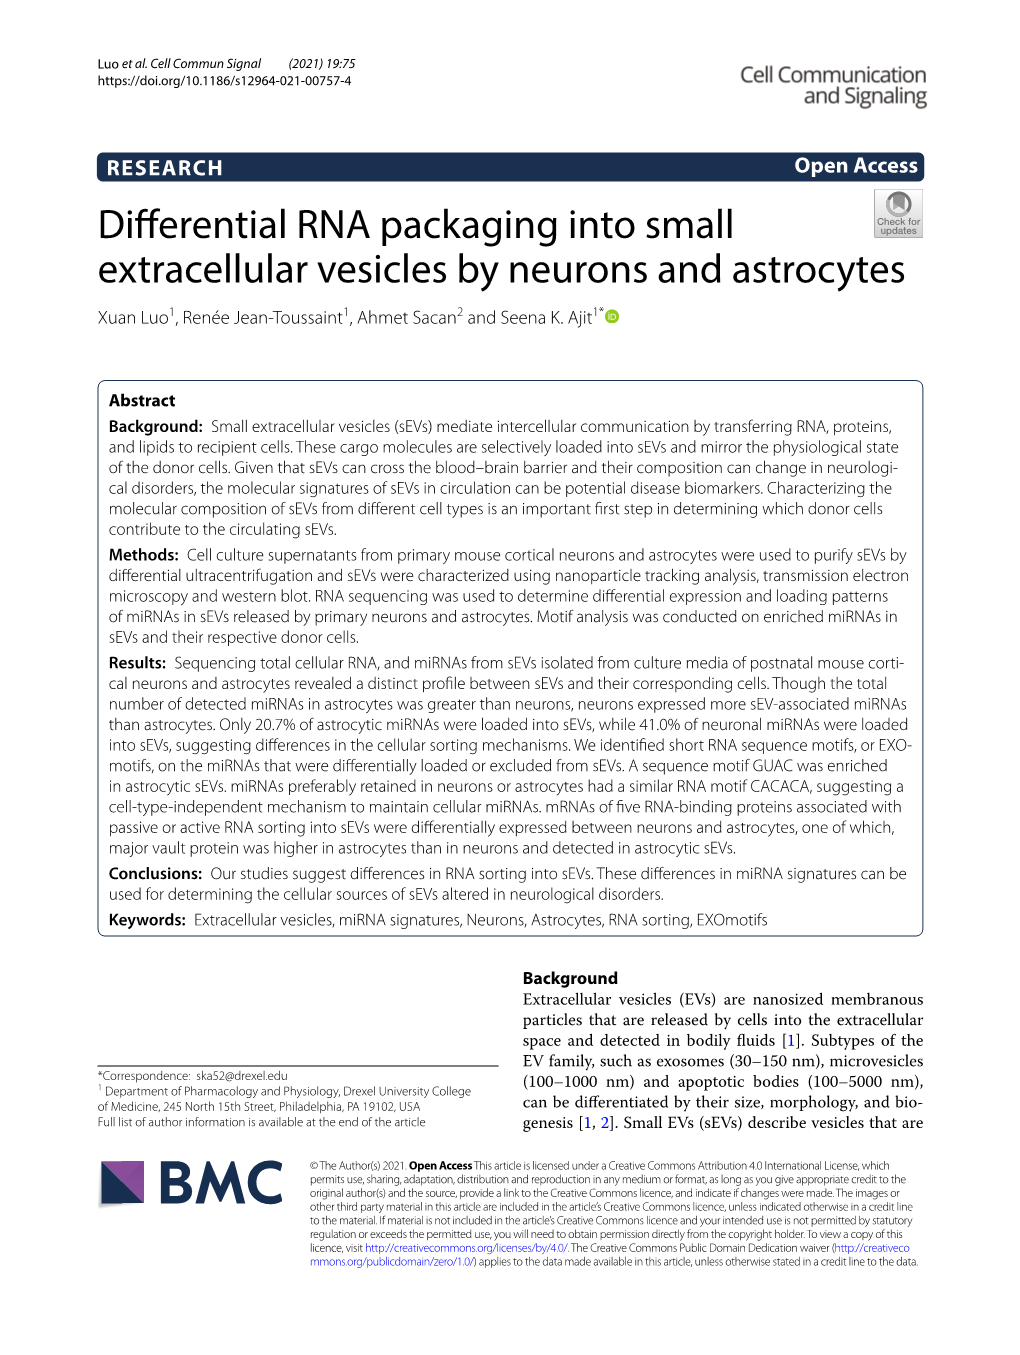 Differential RNA Packaging Into Small Extracellular Vesicles by Neurons